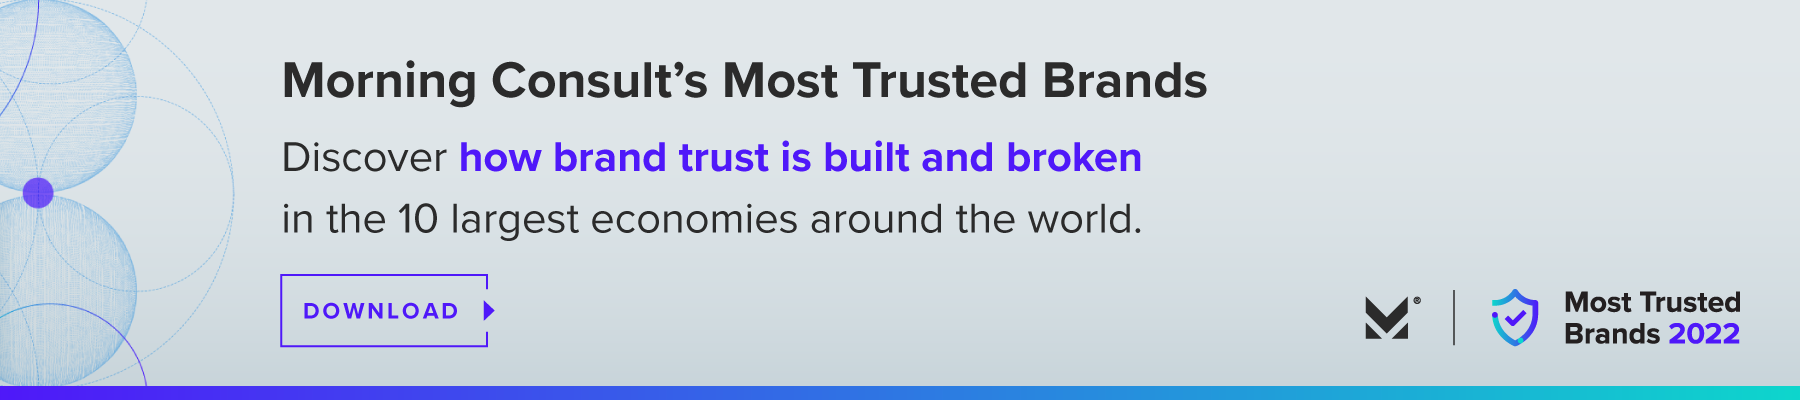 Morning Consult Most Trusted Brands 2022: Report Download